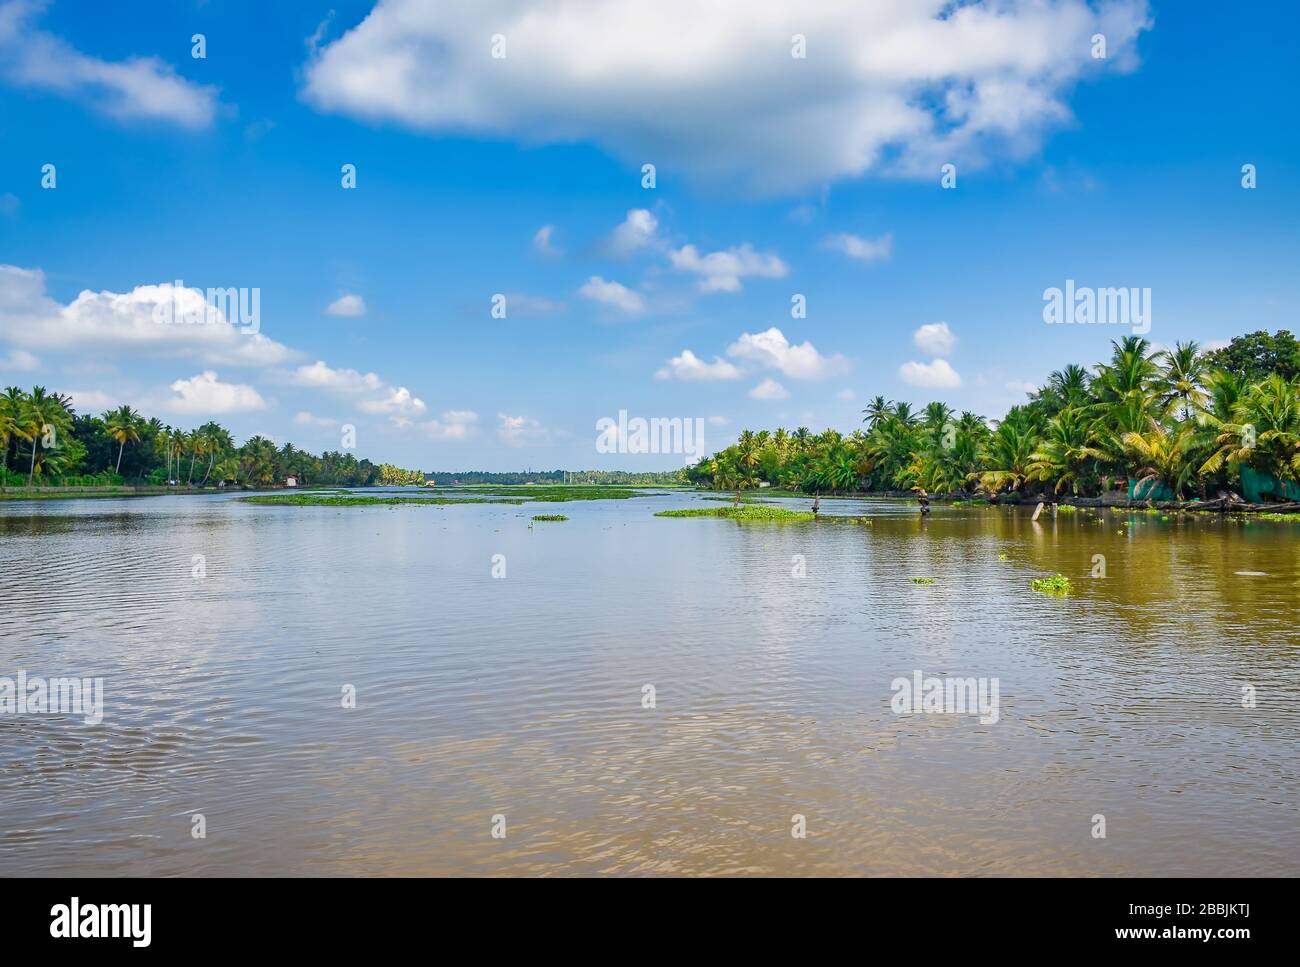 Beautiful view of backwaters in Kerala, India with vegetation and coconut trees on the banks and a clear blue sky in the background. Stock Photo